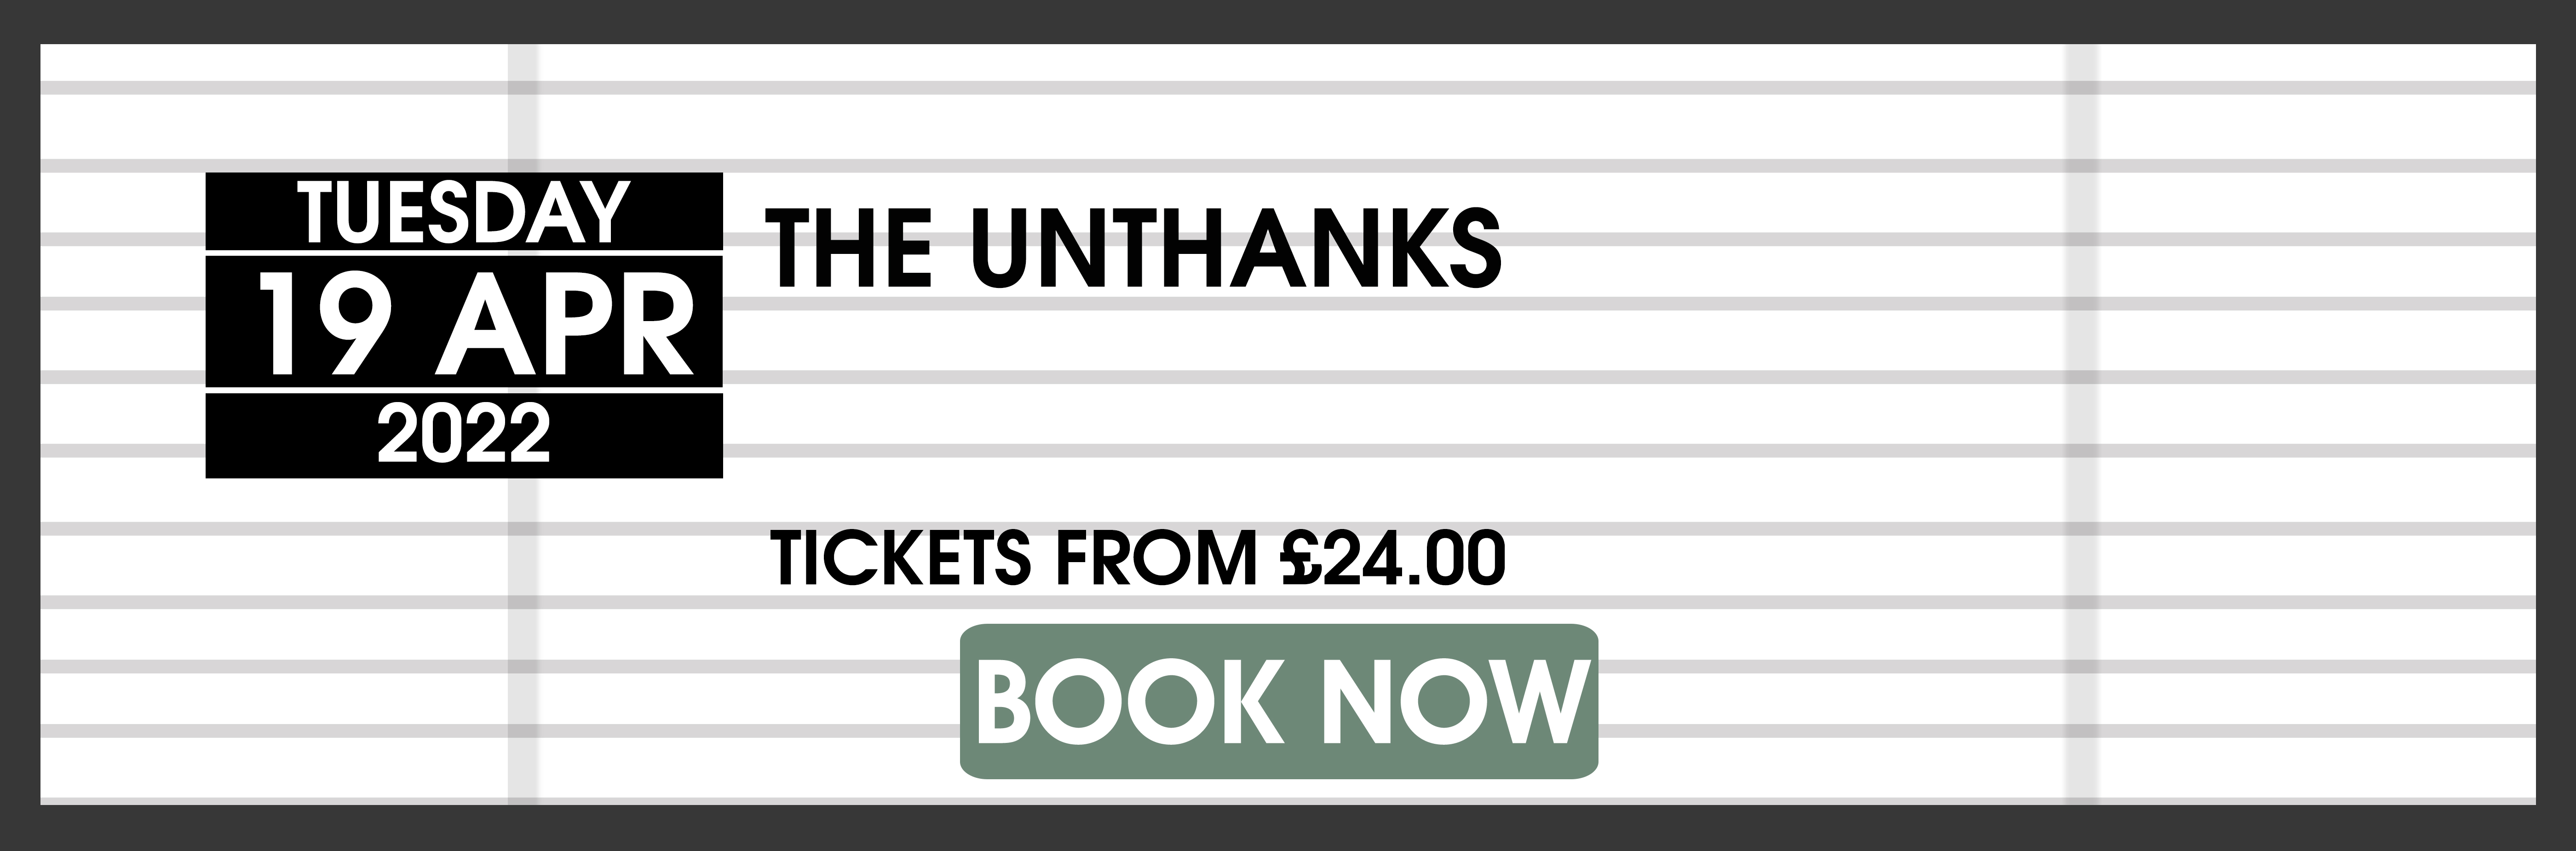 19.04.22 UNTHANKS BOOK NOW